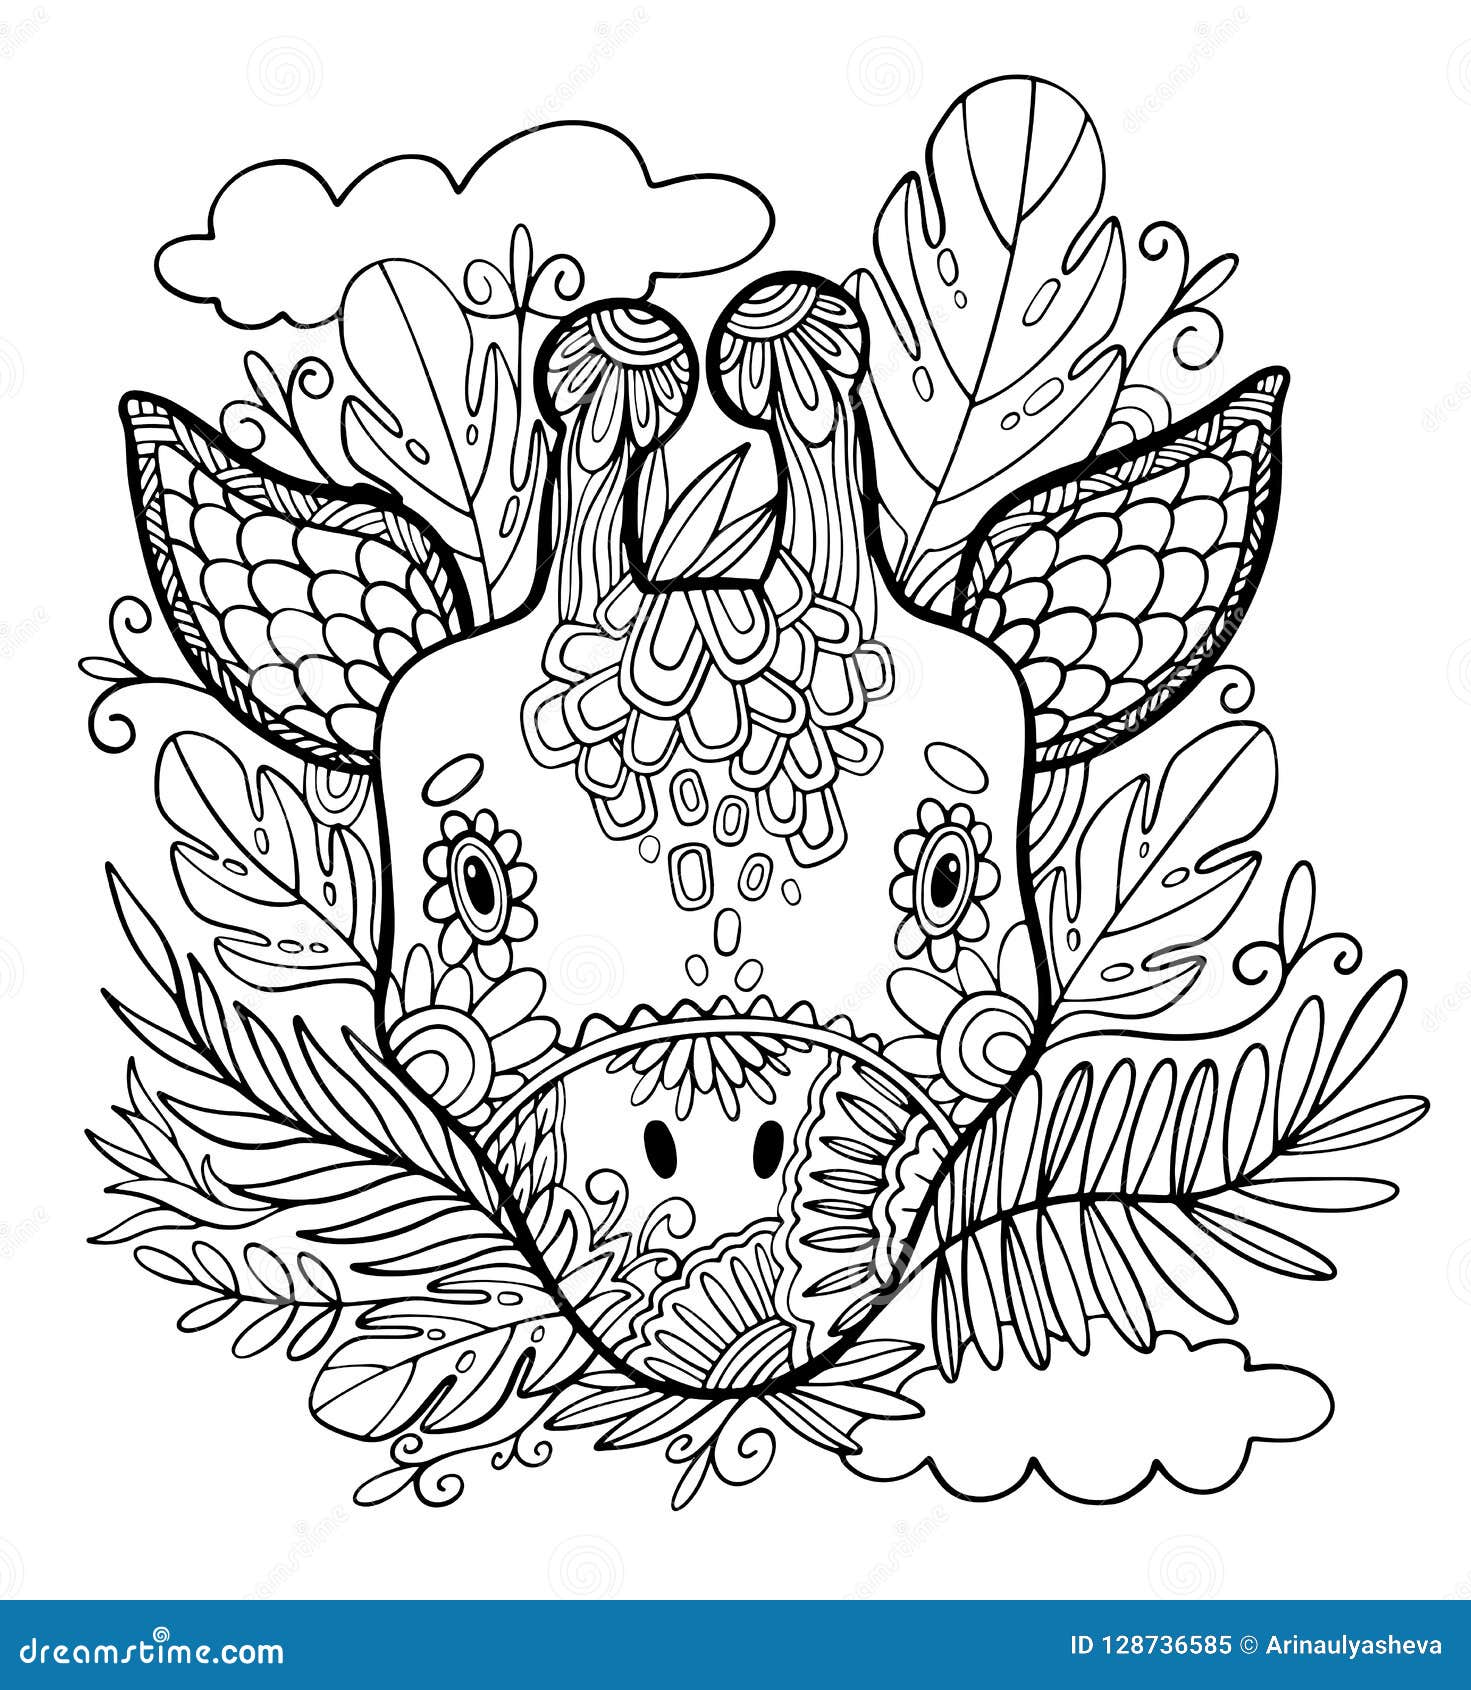 Coloring Pages. Coloring Book for Adults. Beautiful Template with ...